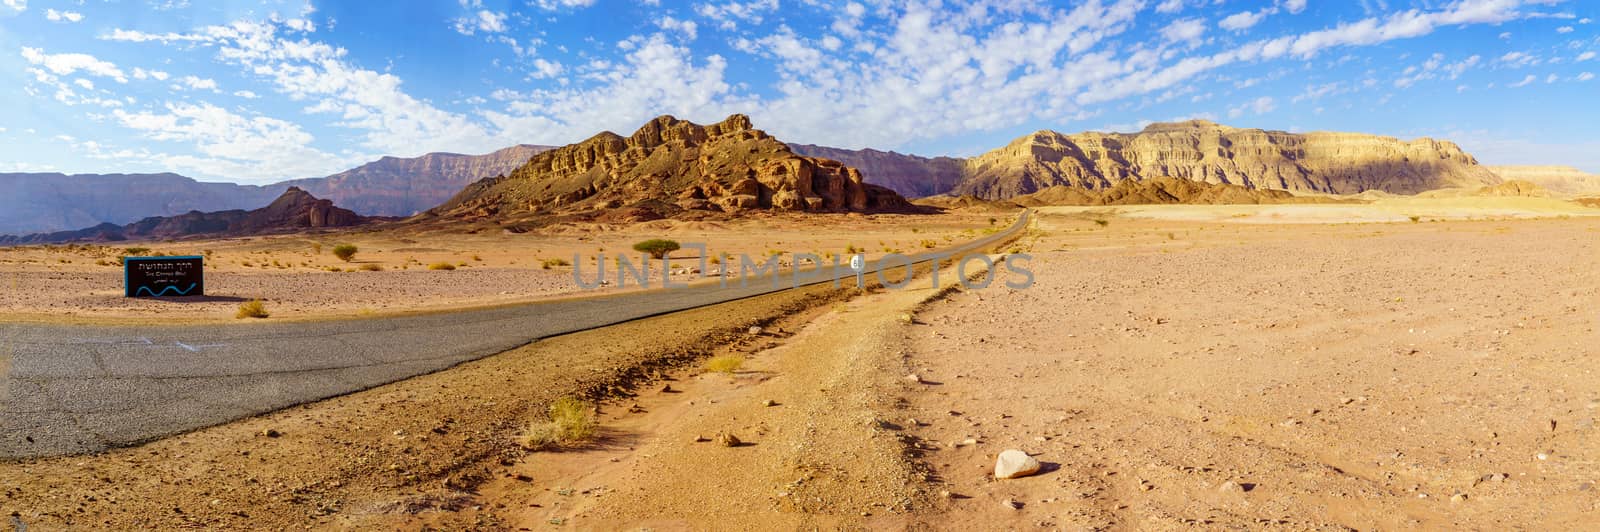 Panoramic view of landscape and the Copper Road, in the Timna Valley, Arava desert, southern Israel